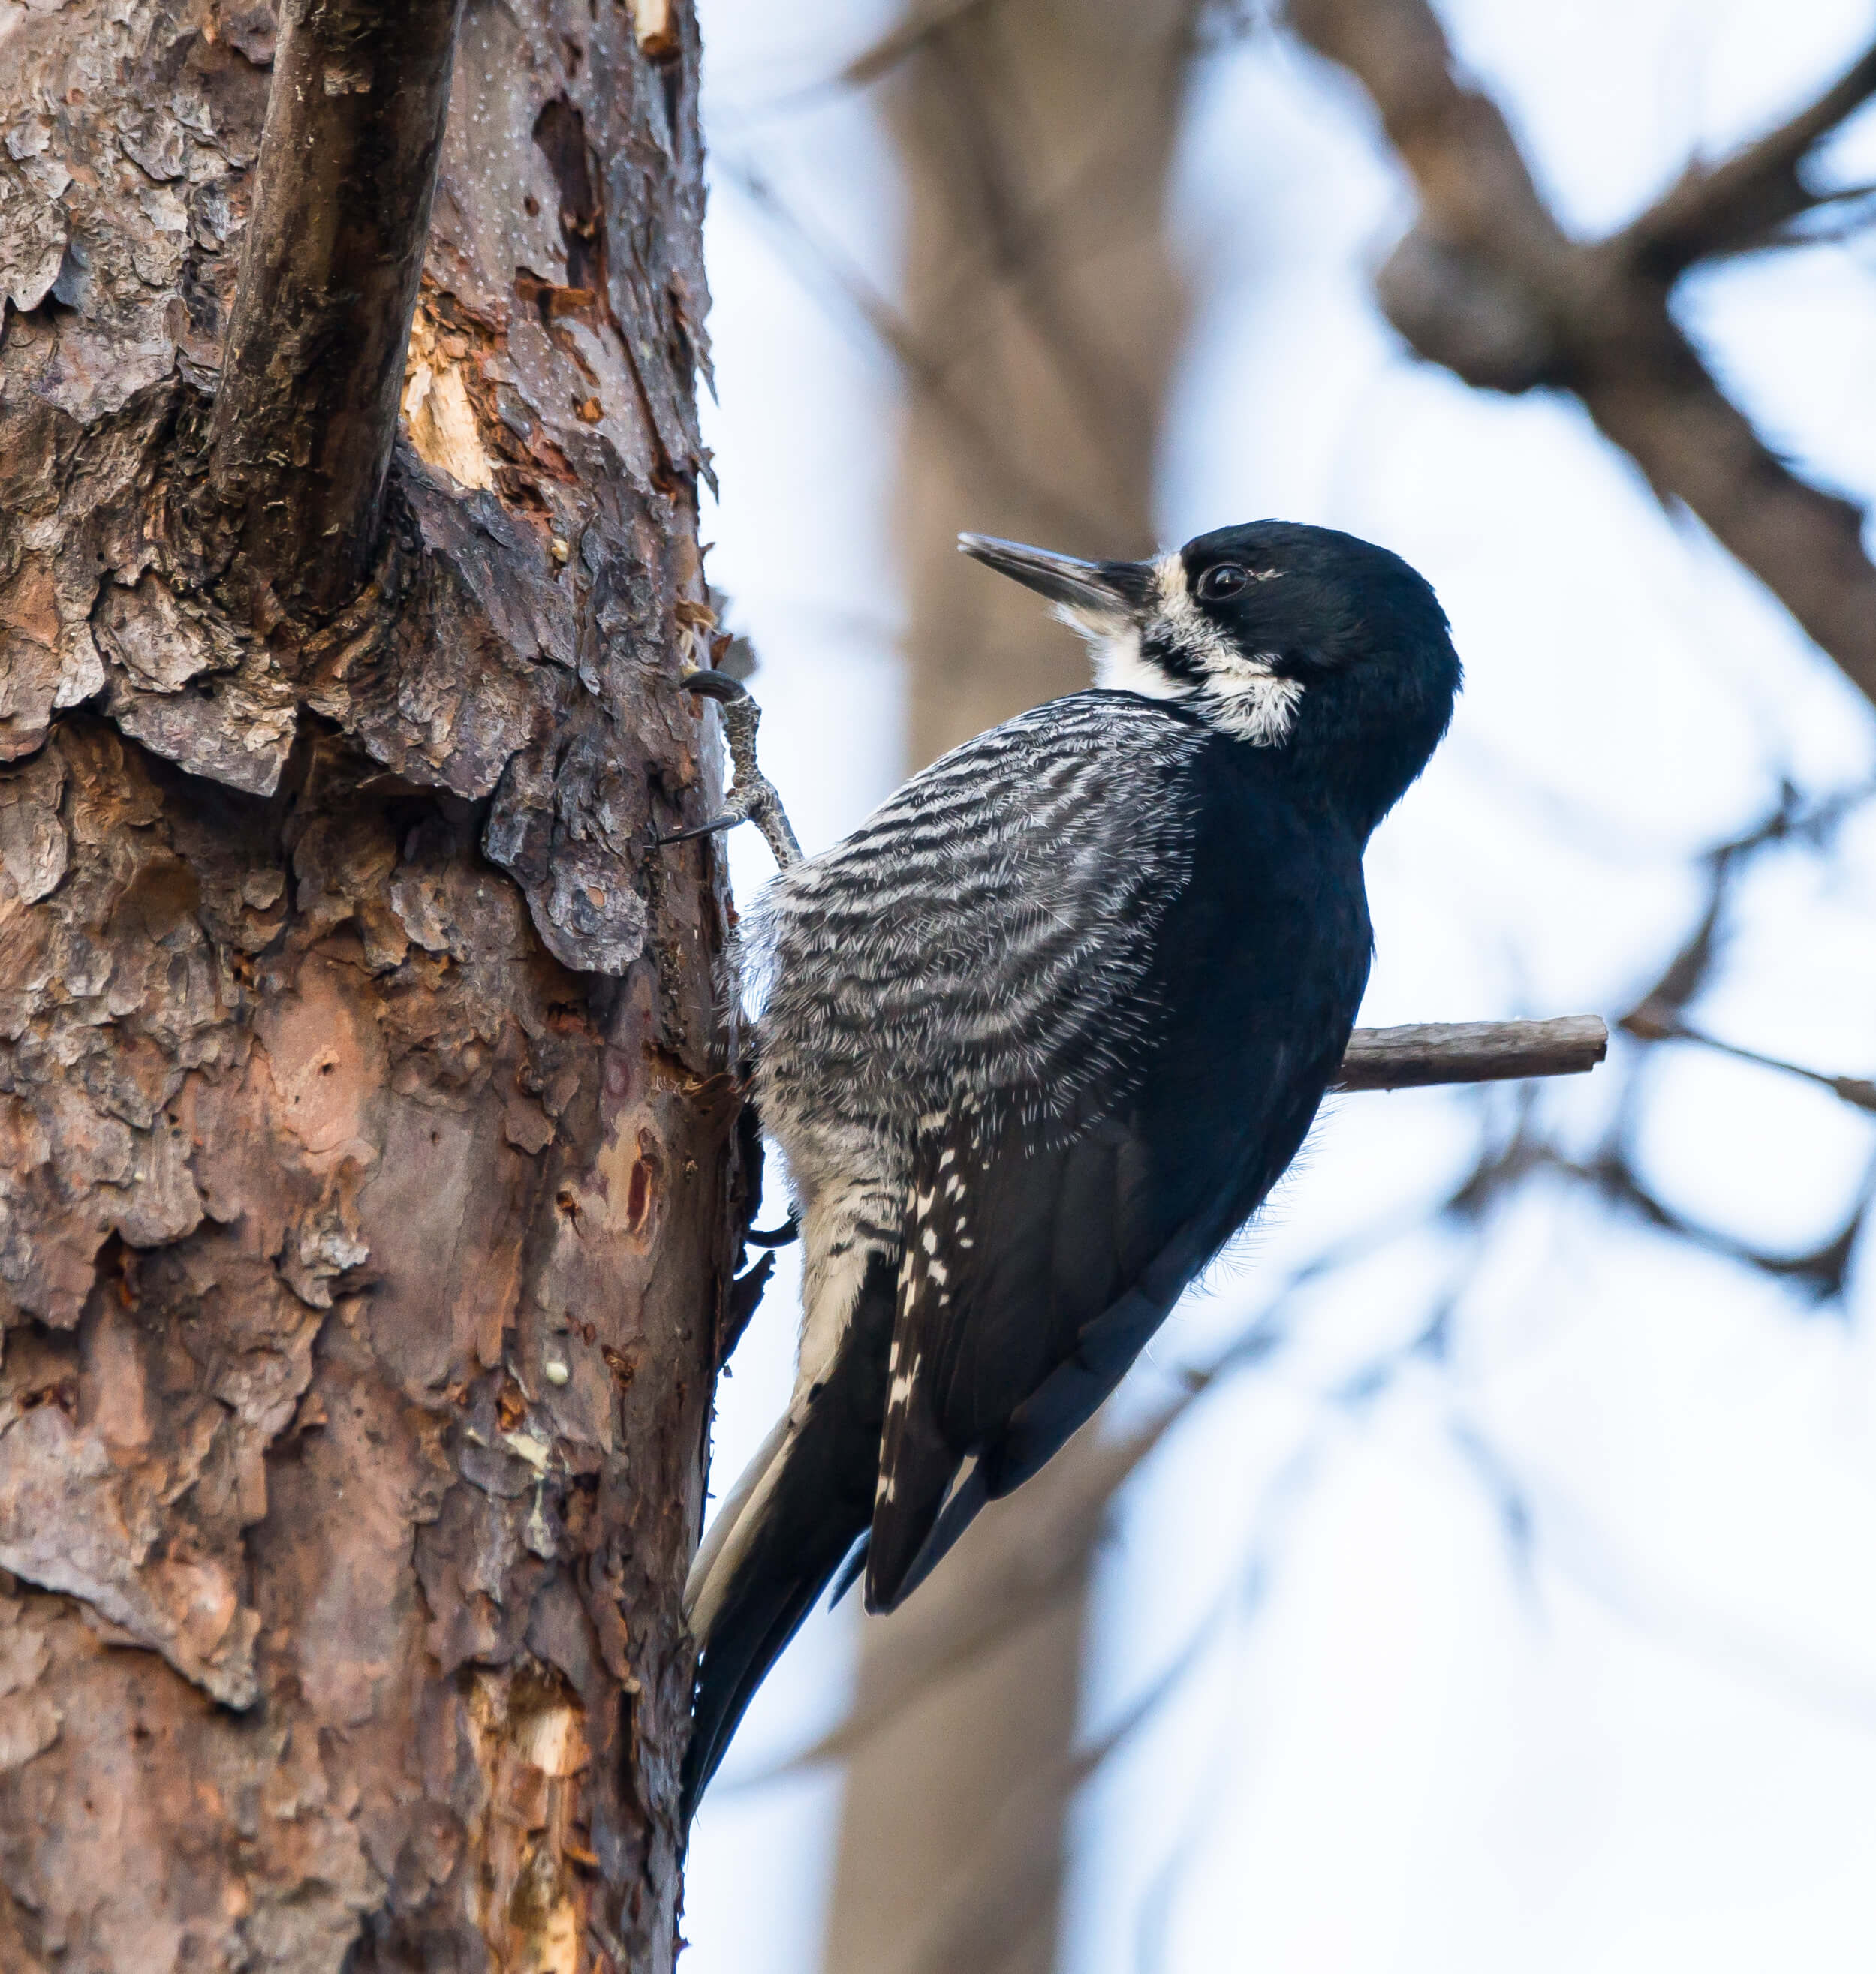 We saw a Black-backed Woodpecker in Itasca State Park, near the headwaters of the Mississippi River. Photo by ShutterShock